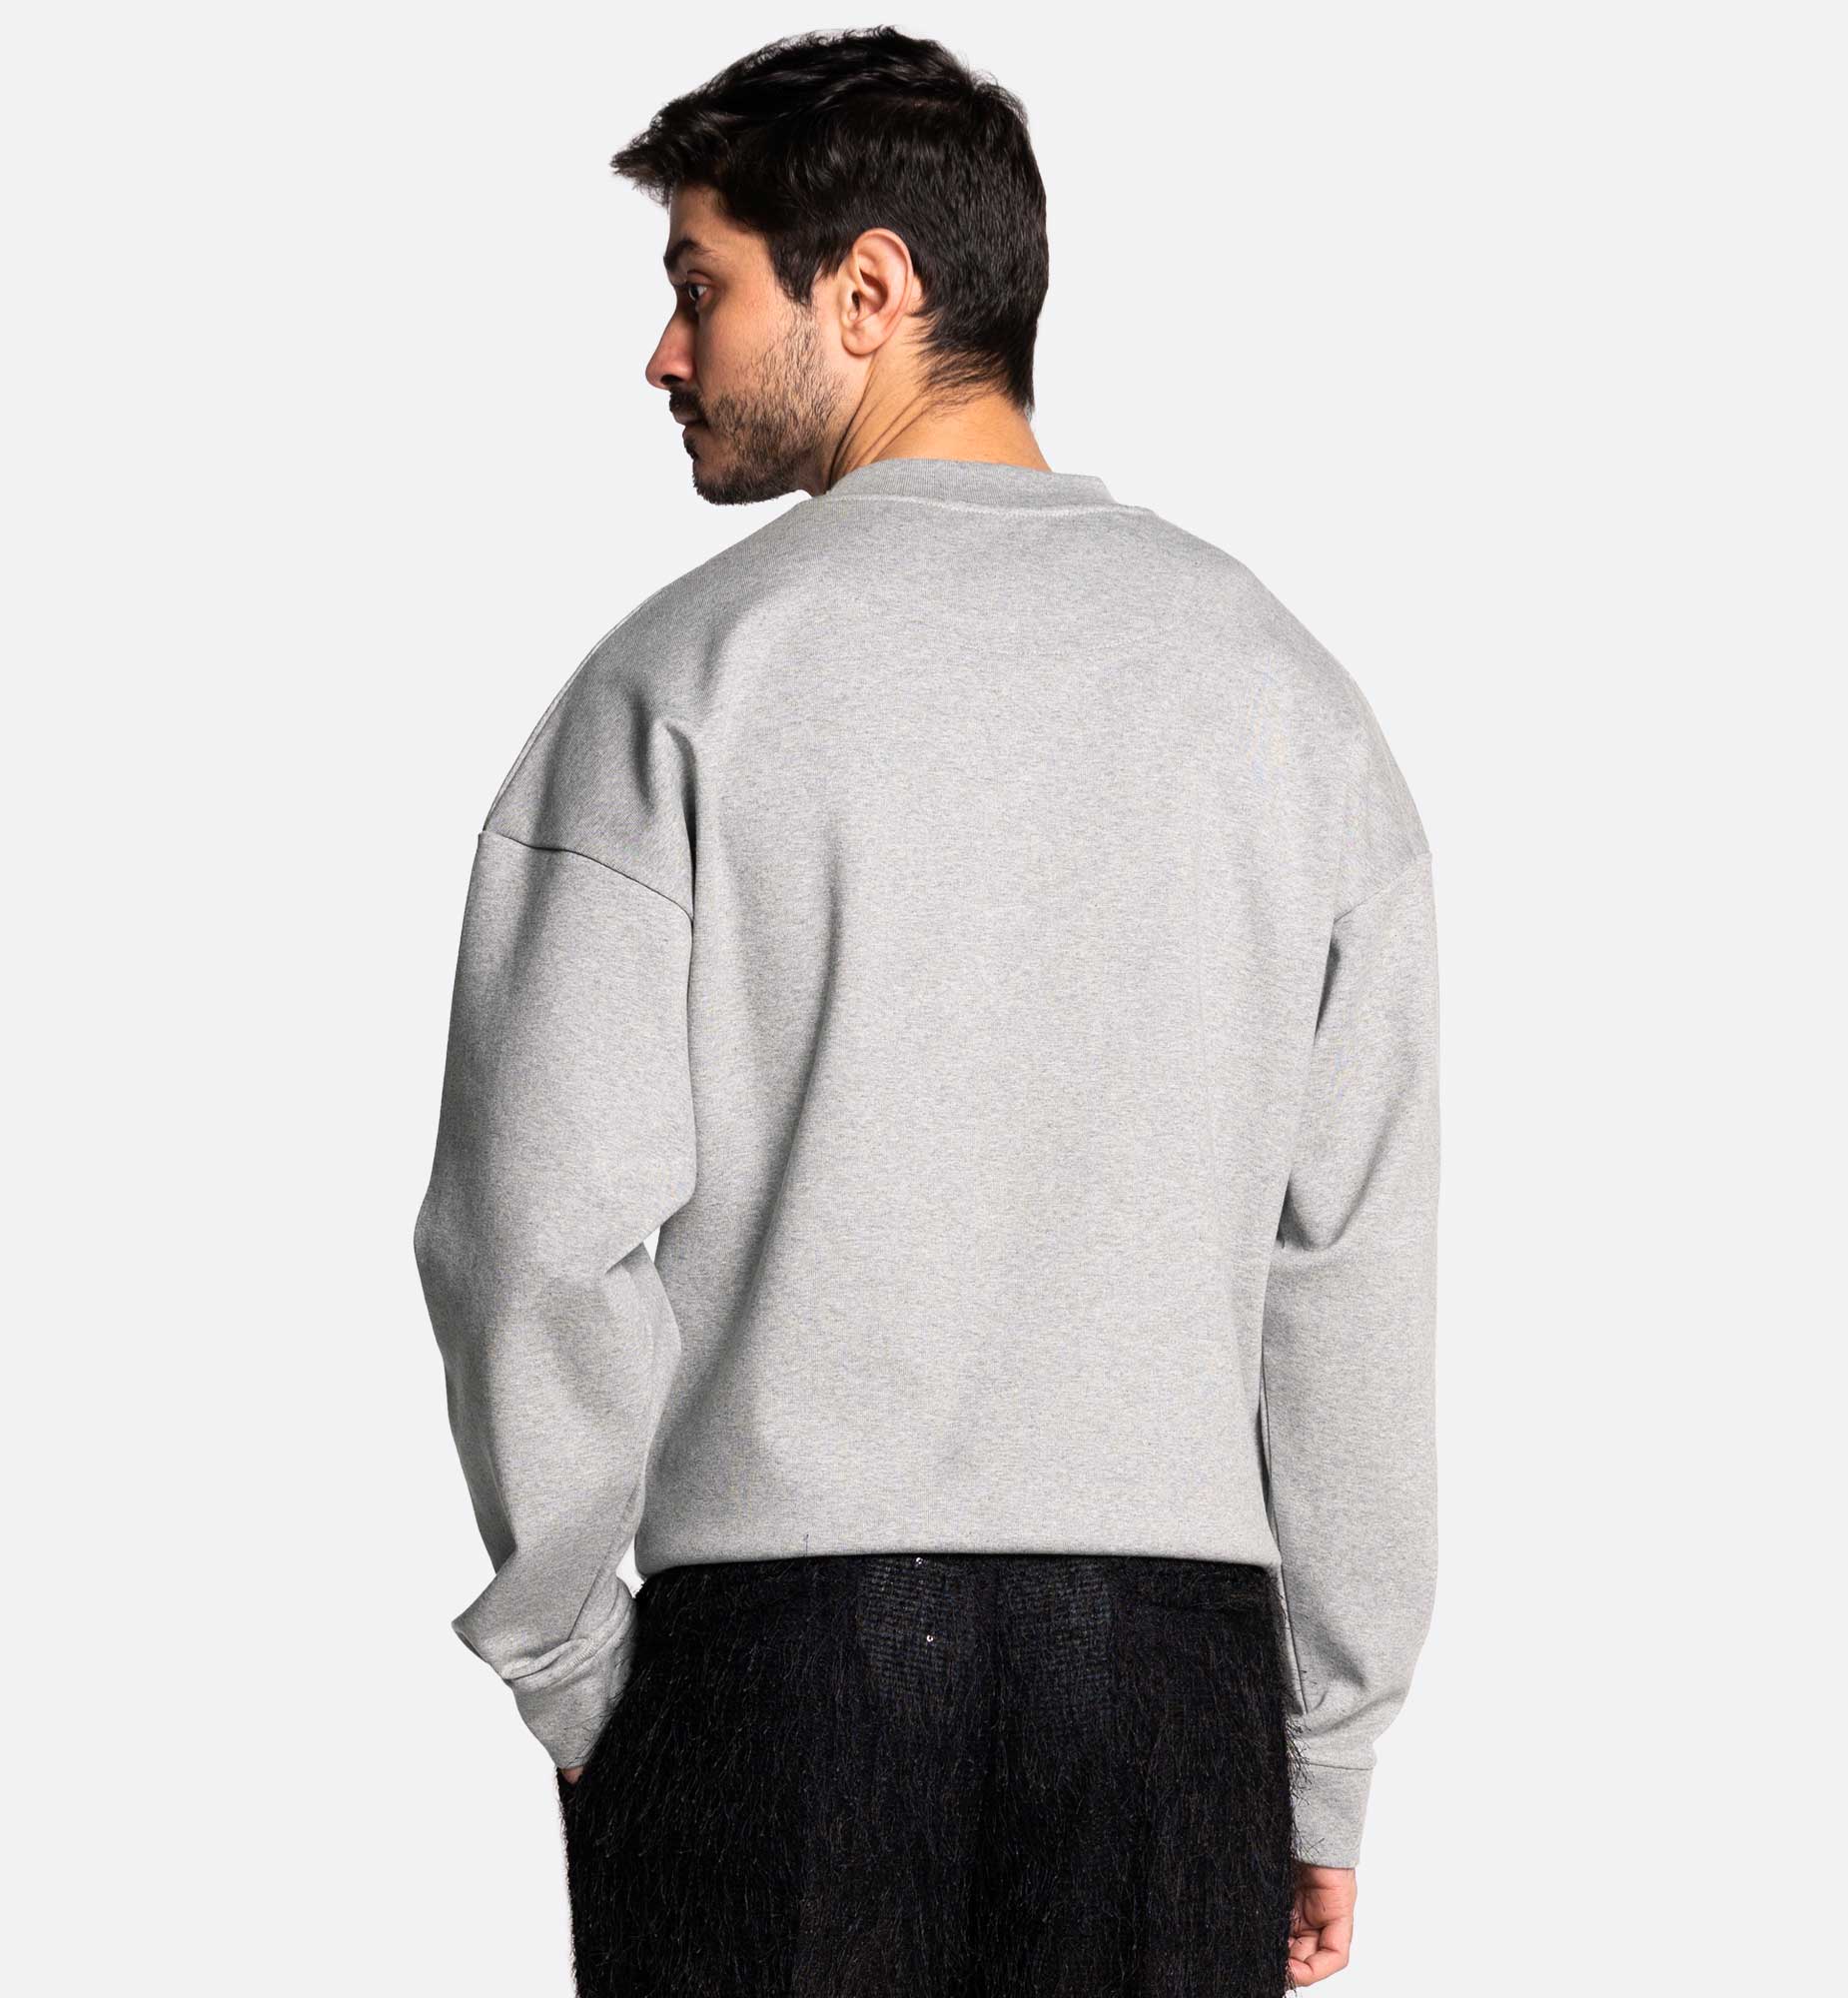 GRAY VISCOSE CREW NECK SWEATER WITH EMBROIDERY ON FRONT